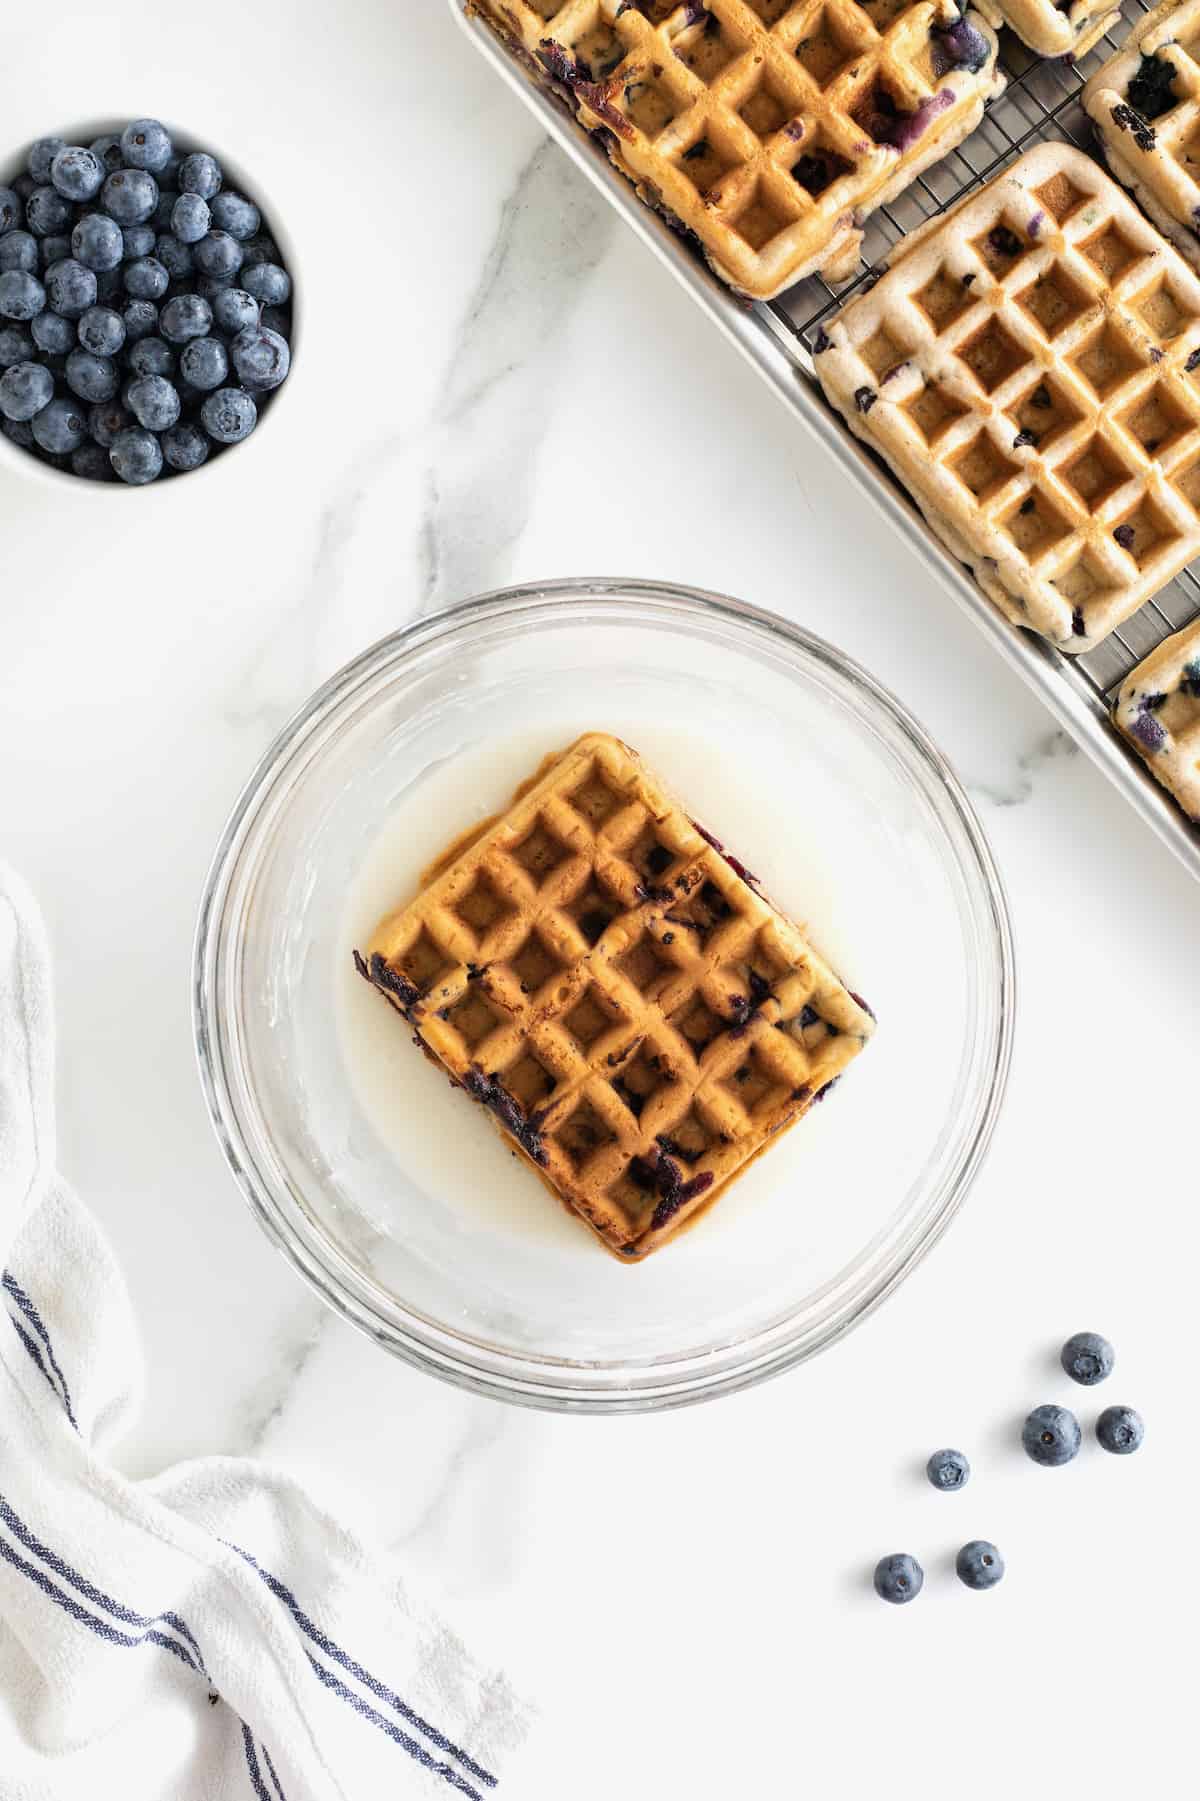 A blueberry waffle laying in a glass bowl of white glaze.